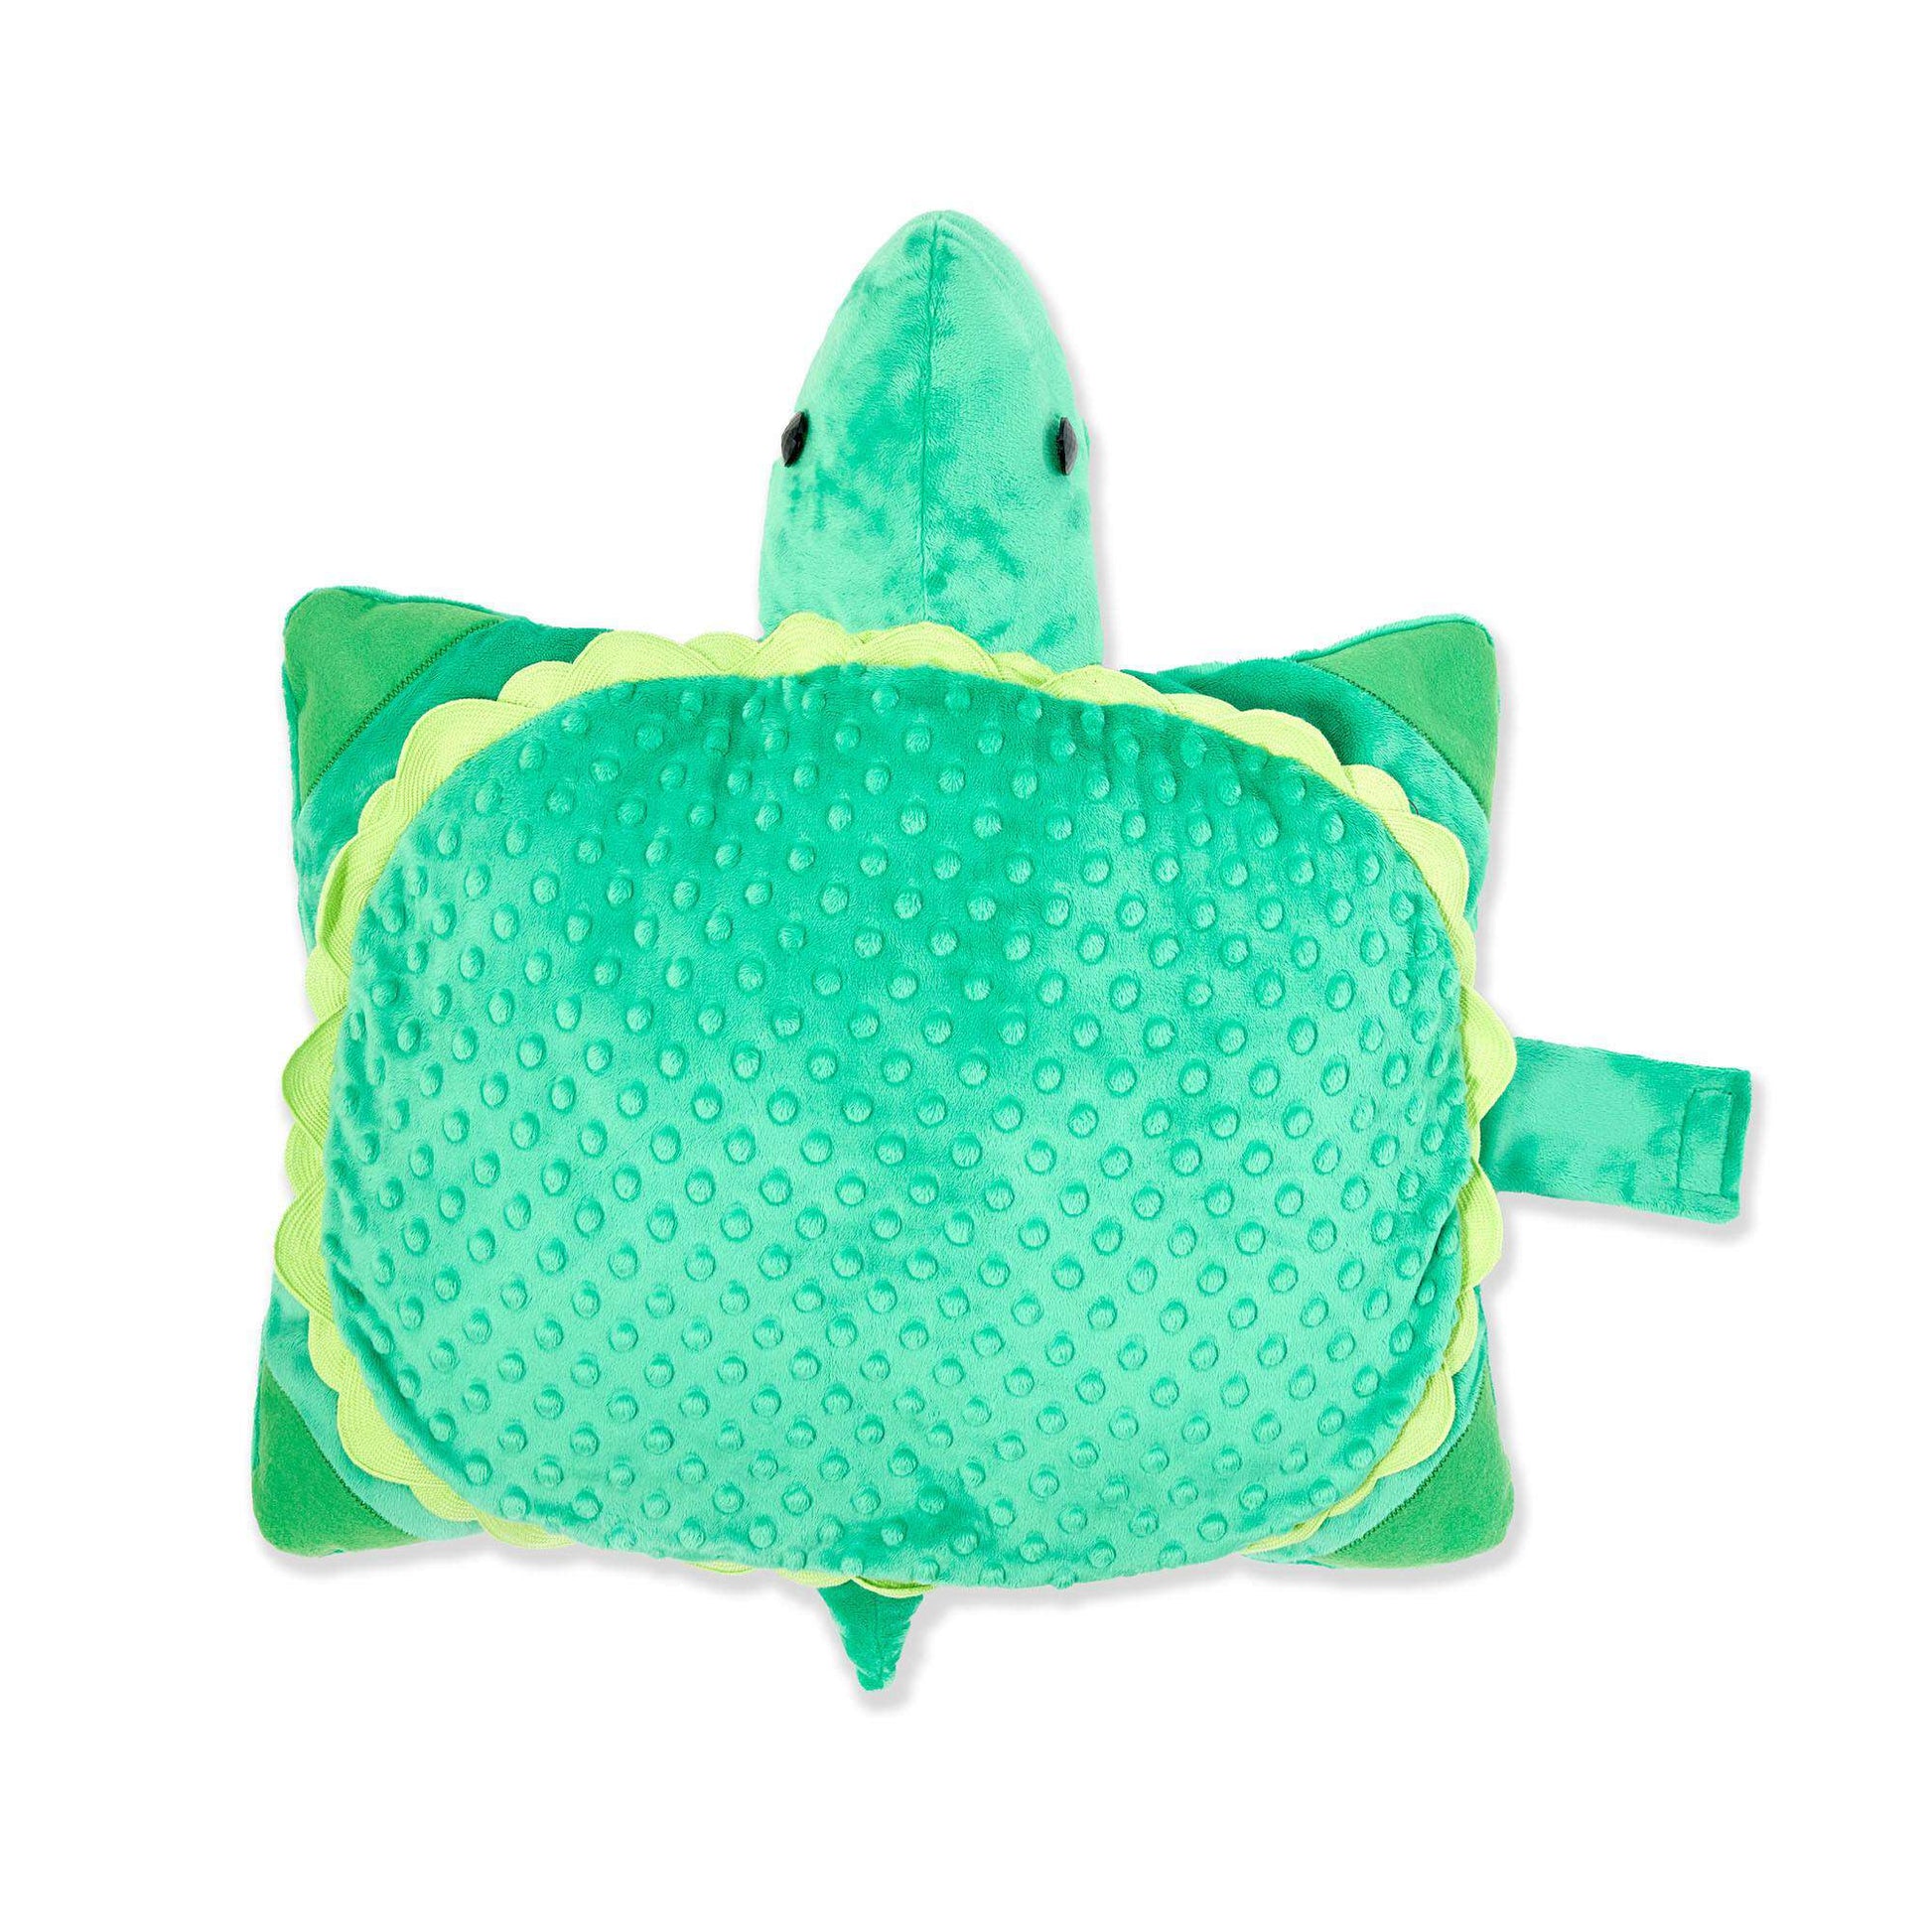 Free Coats & Clark Sewing Tommy Turtle Pillow Pattern